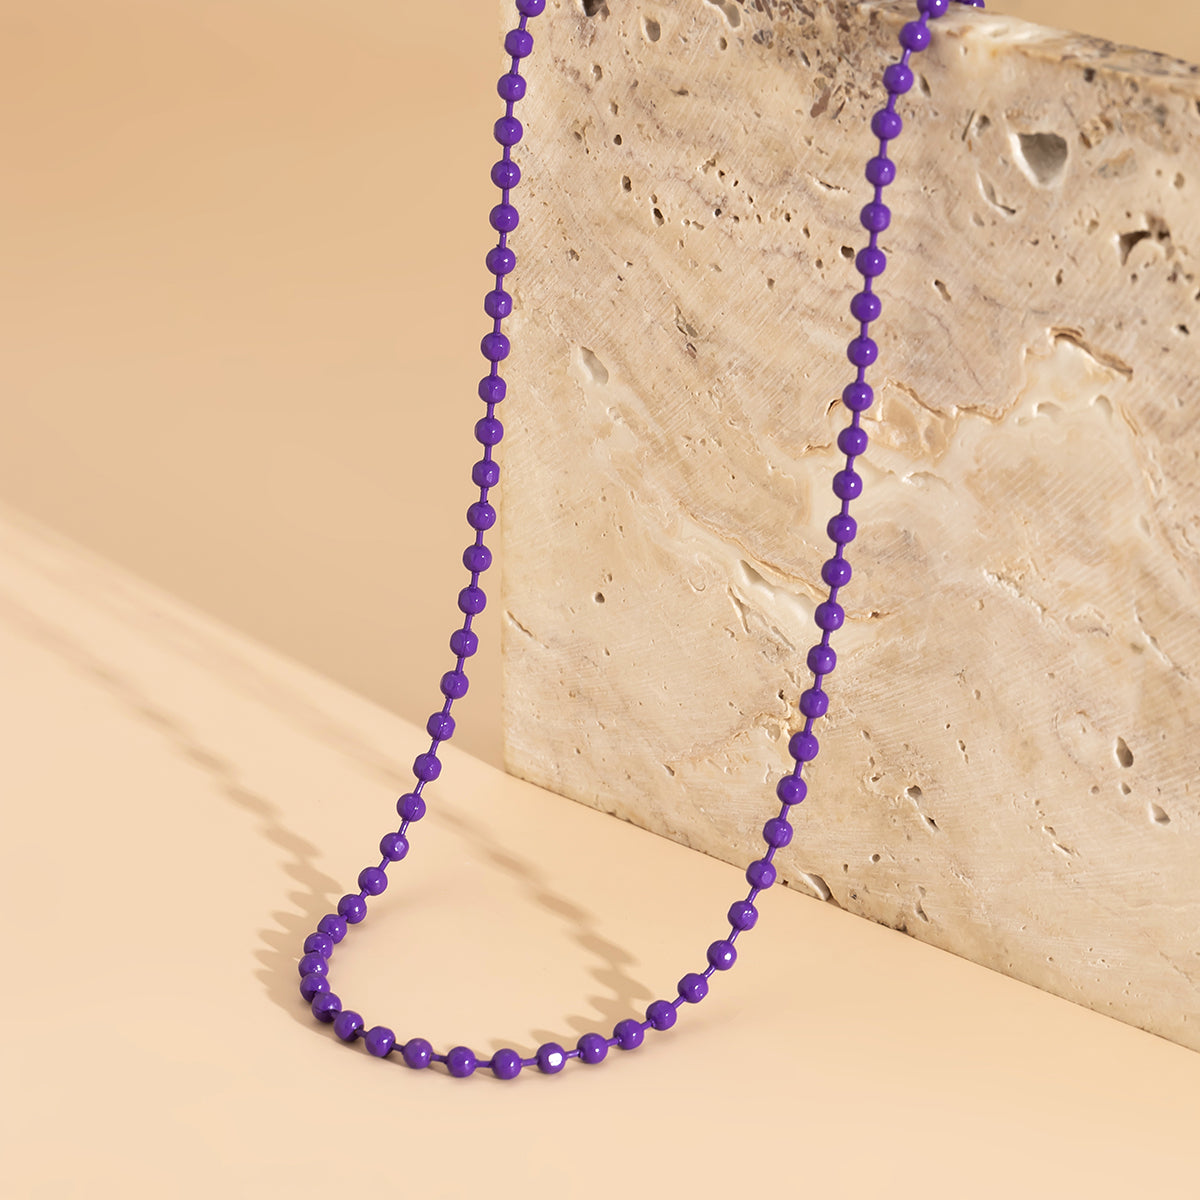 Purple Enamel & Silver-Plated Bead Chain Necklace